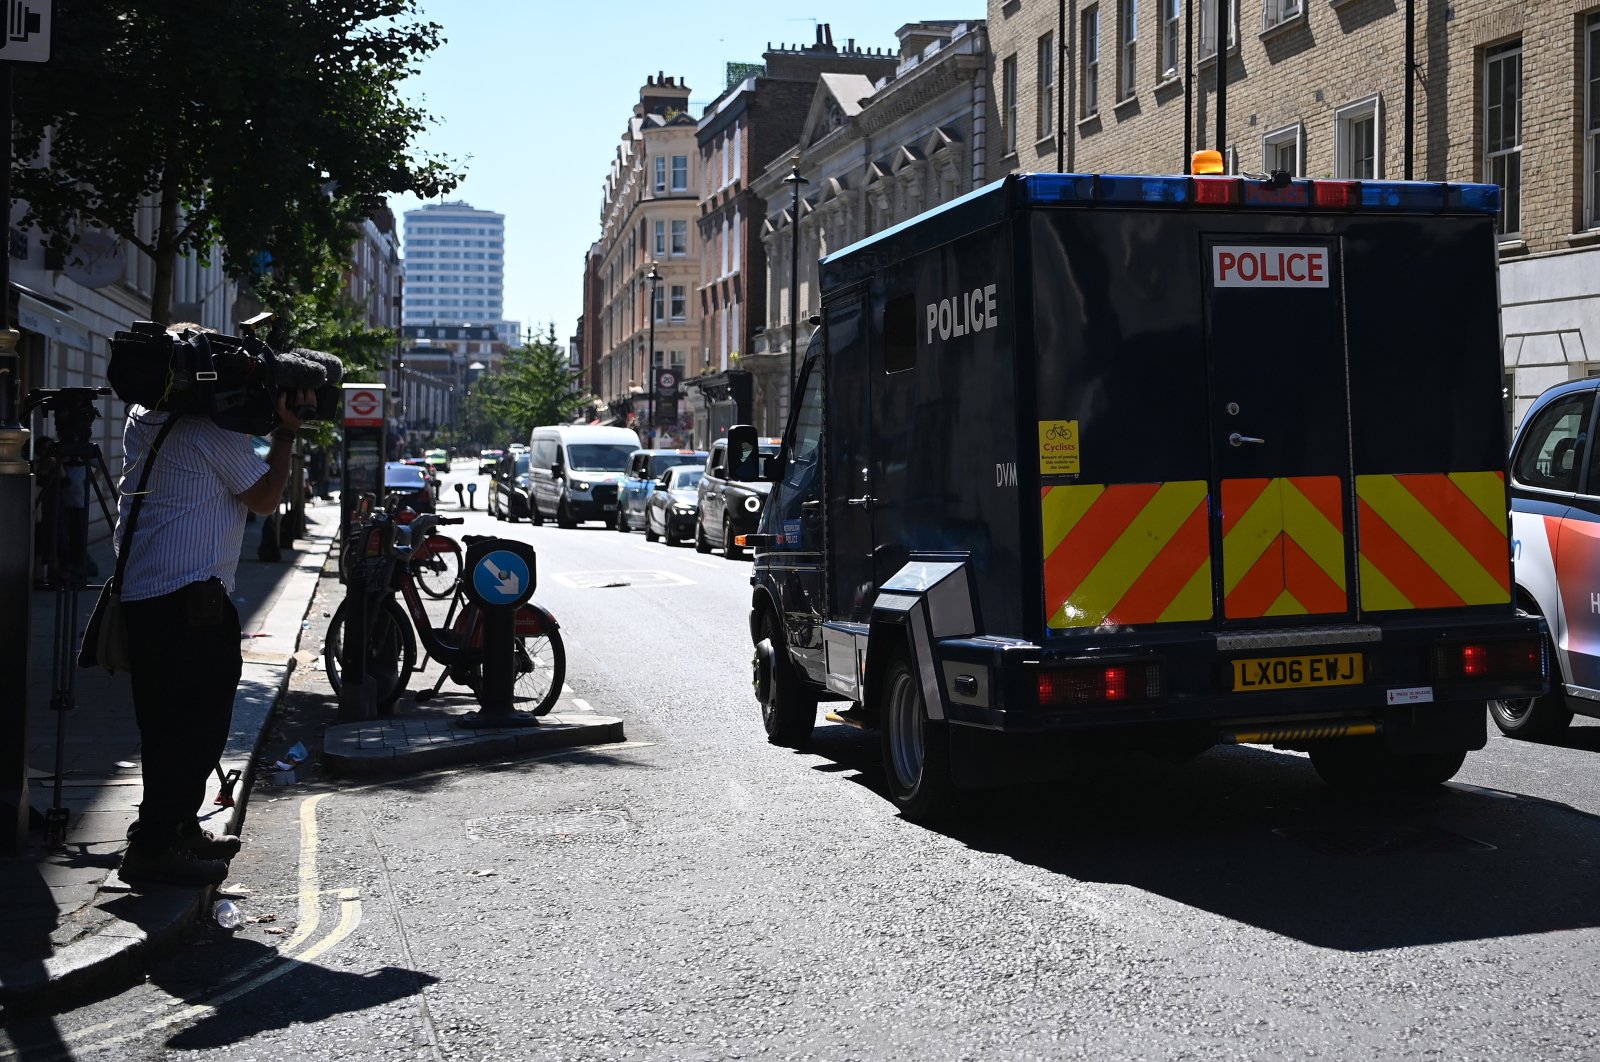 Media members watch a van carrying British terror suspect Aine Davis as he is transported from Westminster Magistrates Court in London, Britain, Aug. 11, 2022. (EPA Photo)